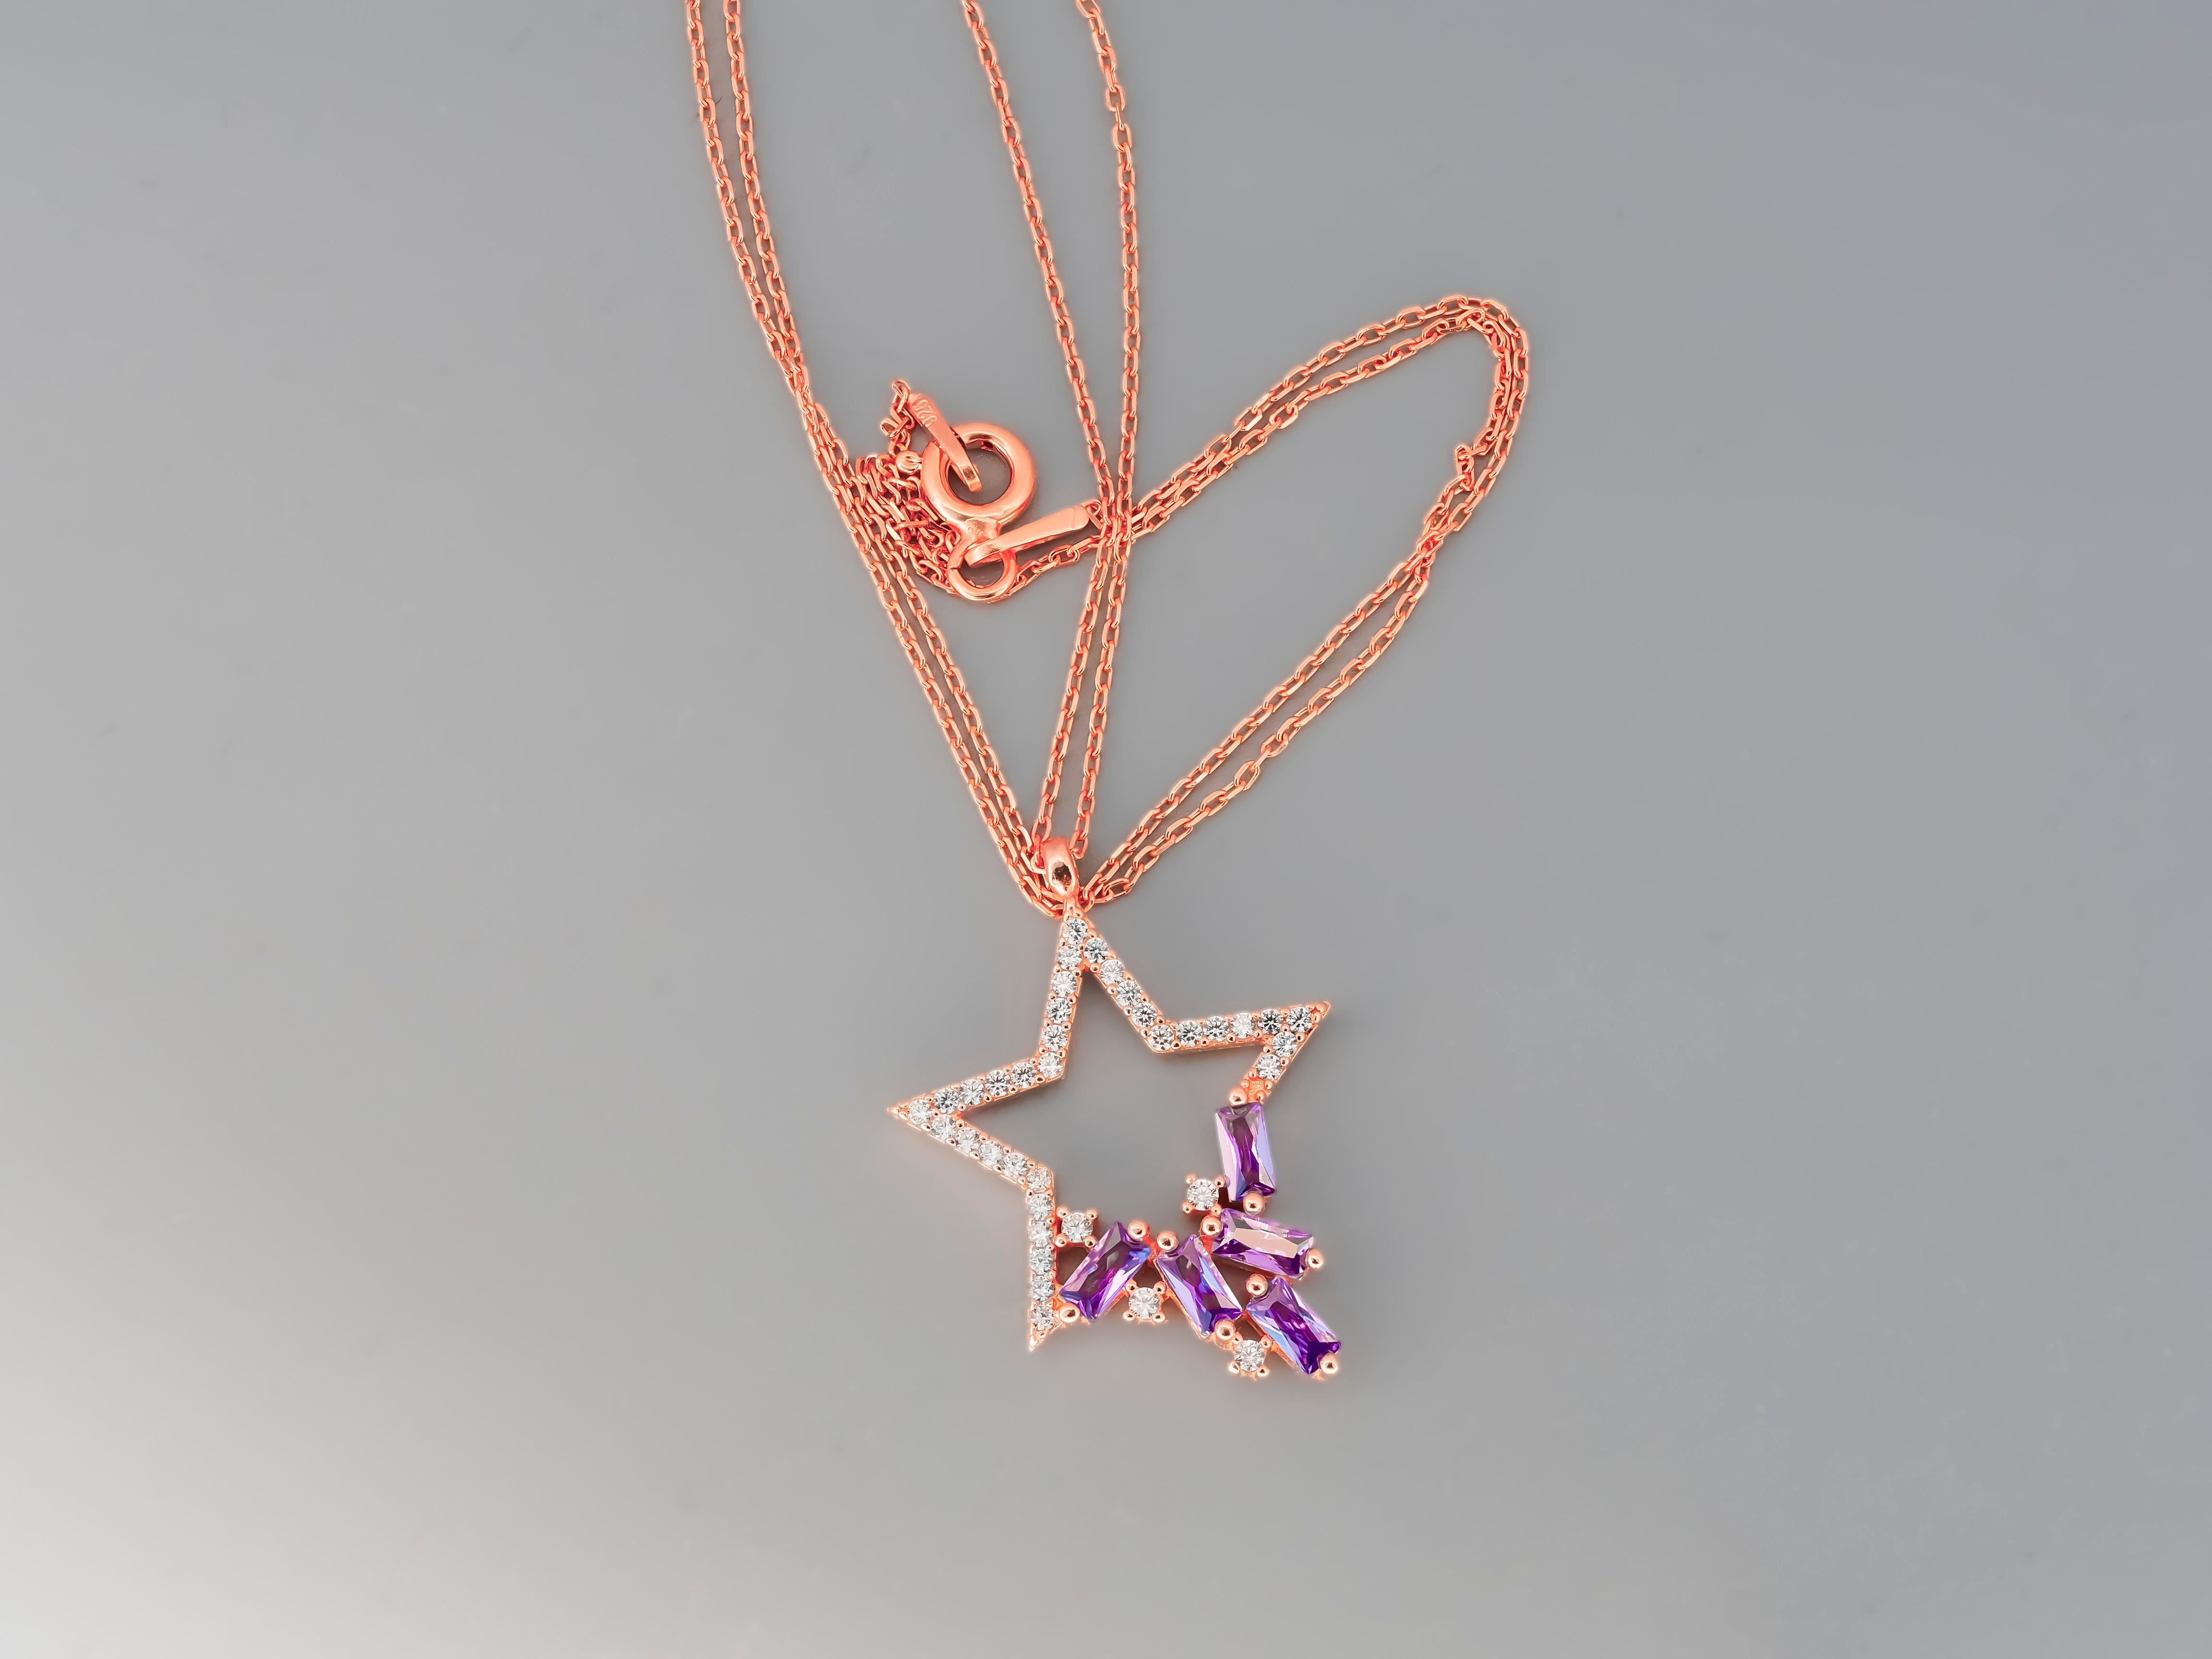 Women's or Men's Star Pendant Necklace with Colored Gemstones, Chain Necklace with Star Pendant